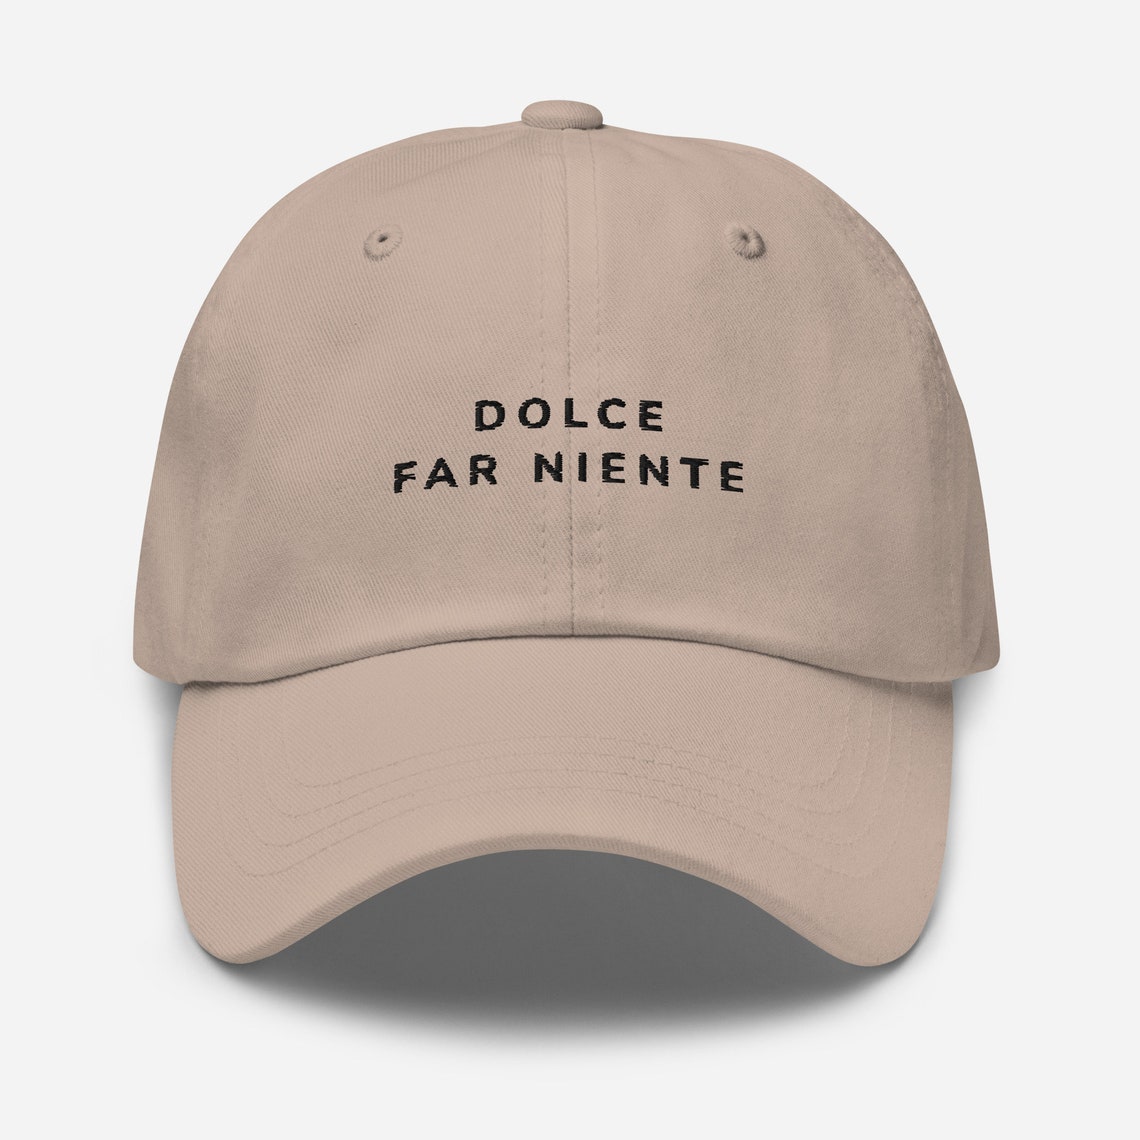 Dolce Far Niente Embroidered Dad Hat - Etsy